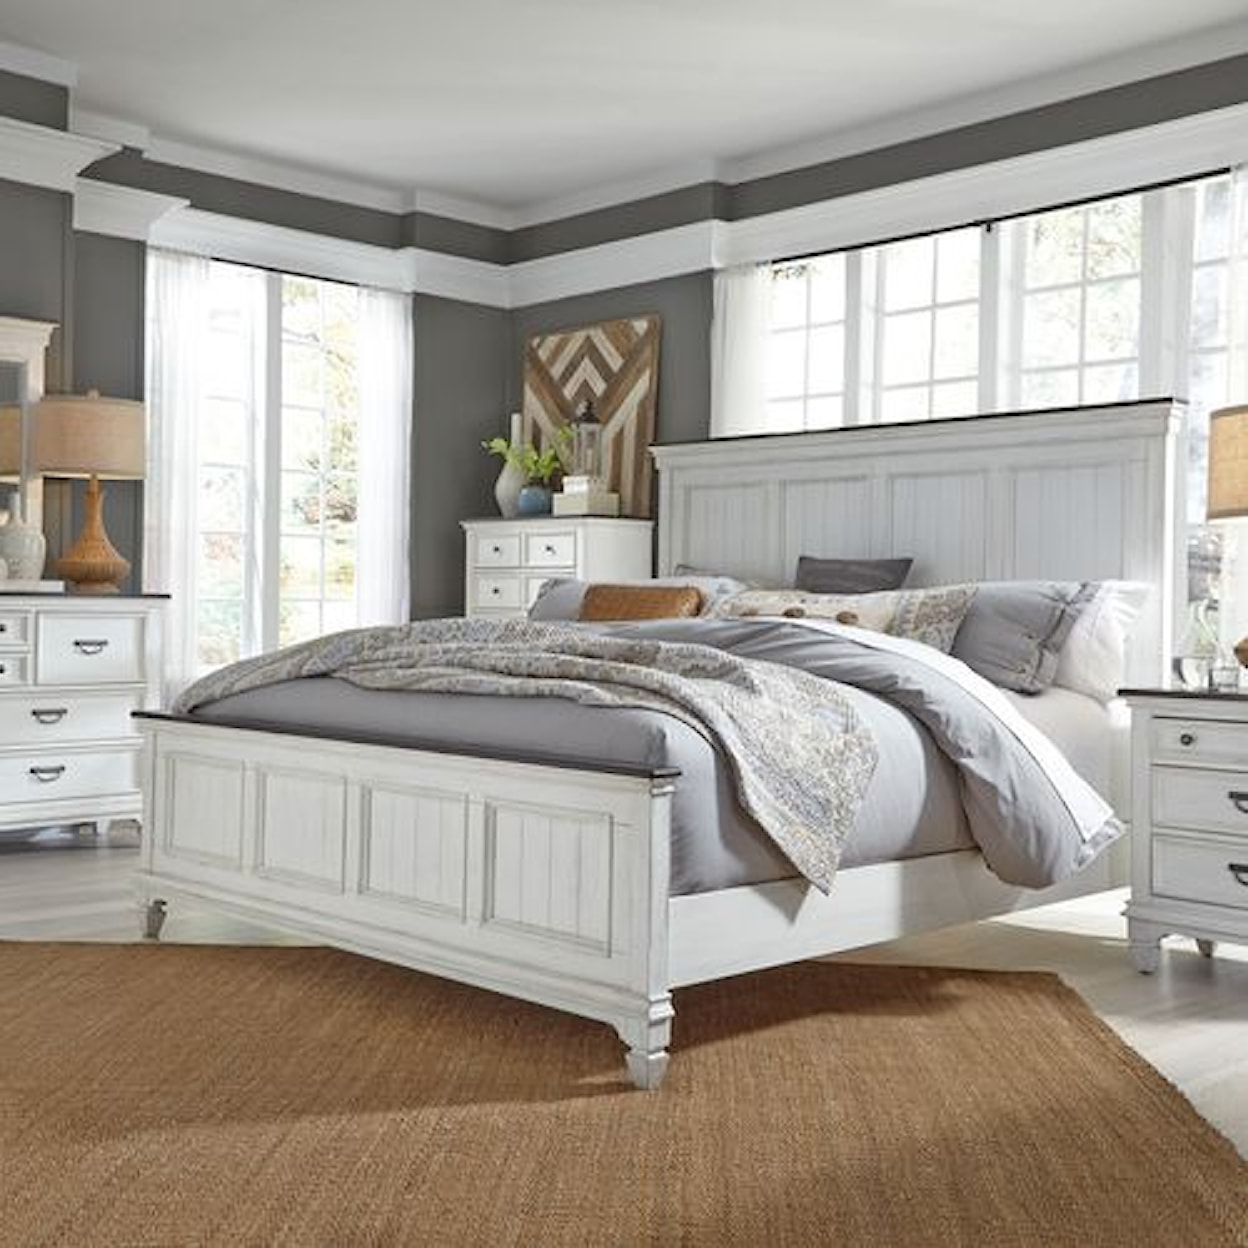 Liberty Furniture Allyson Park 5-Piece California King Bedroom Group